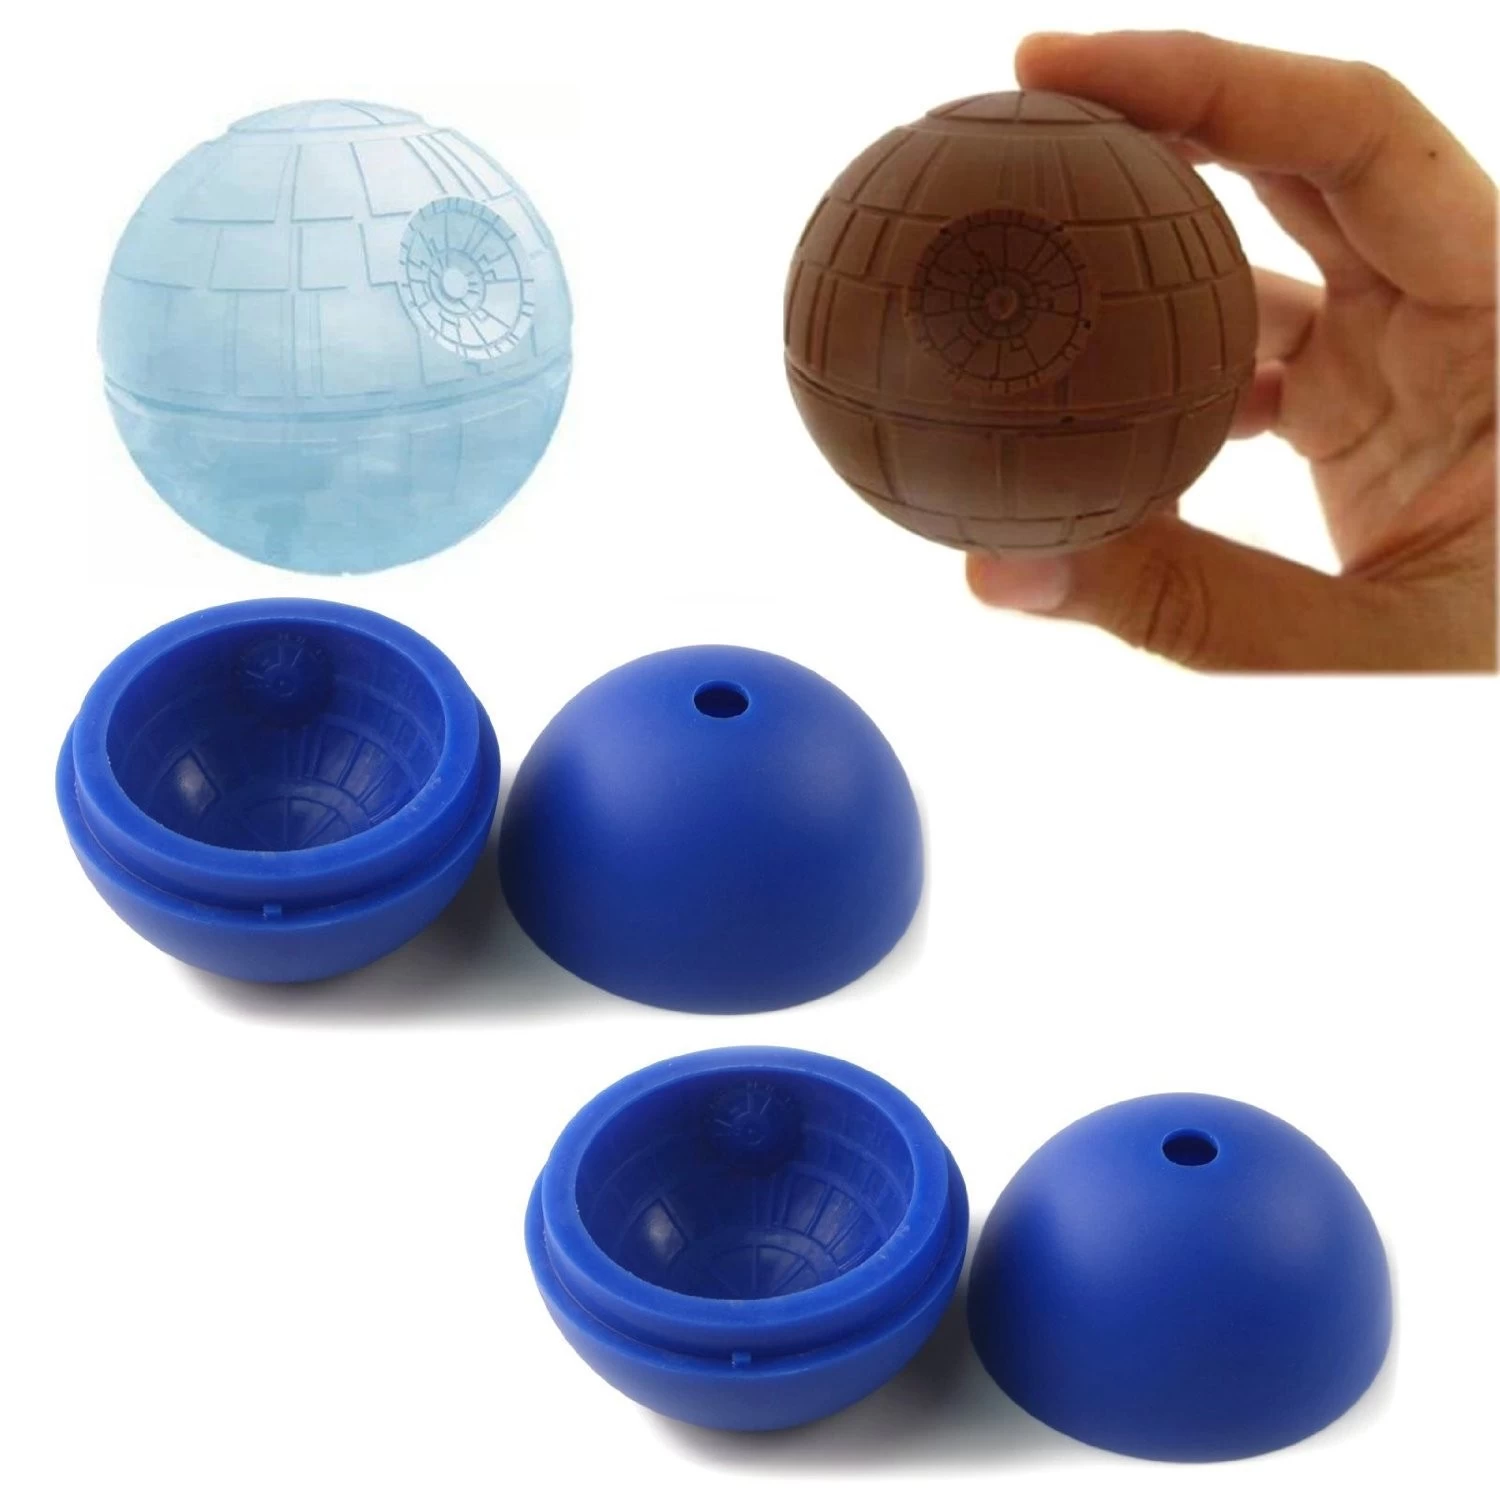 2 pack of Star Wars Death Star Silicone Sphere ice ball maker mold